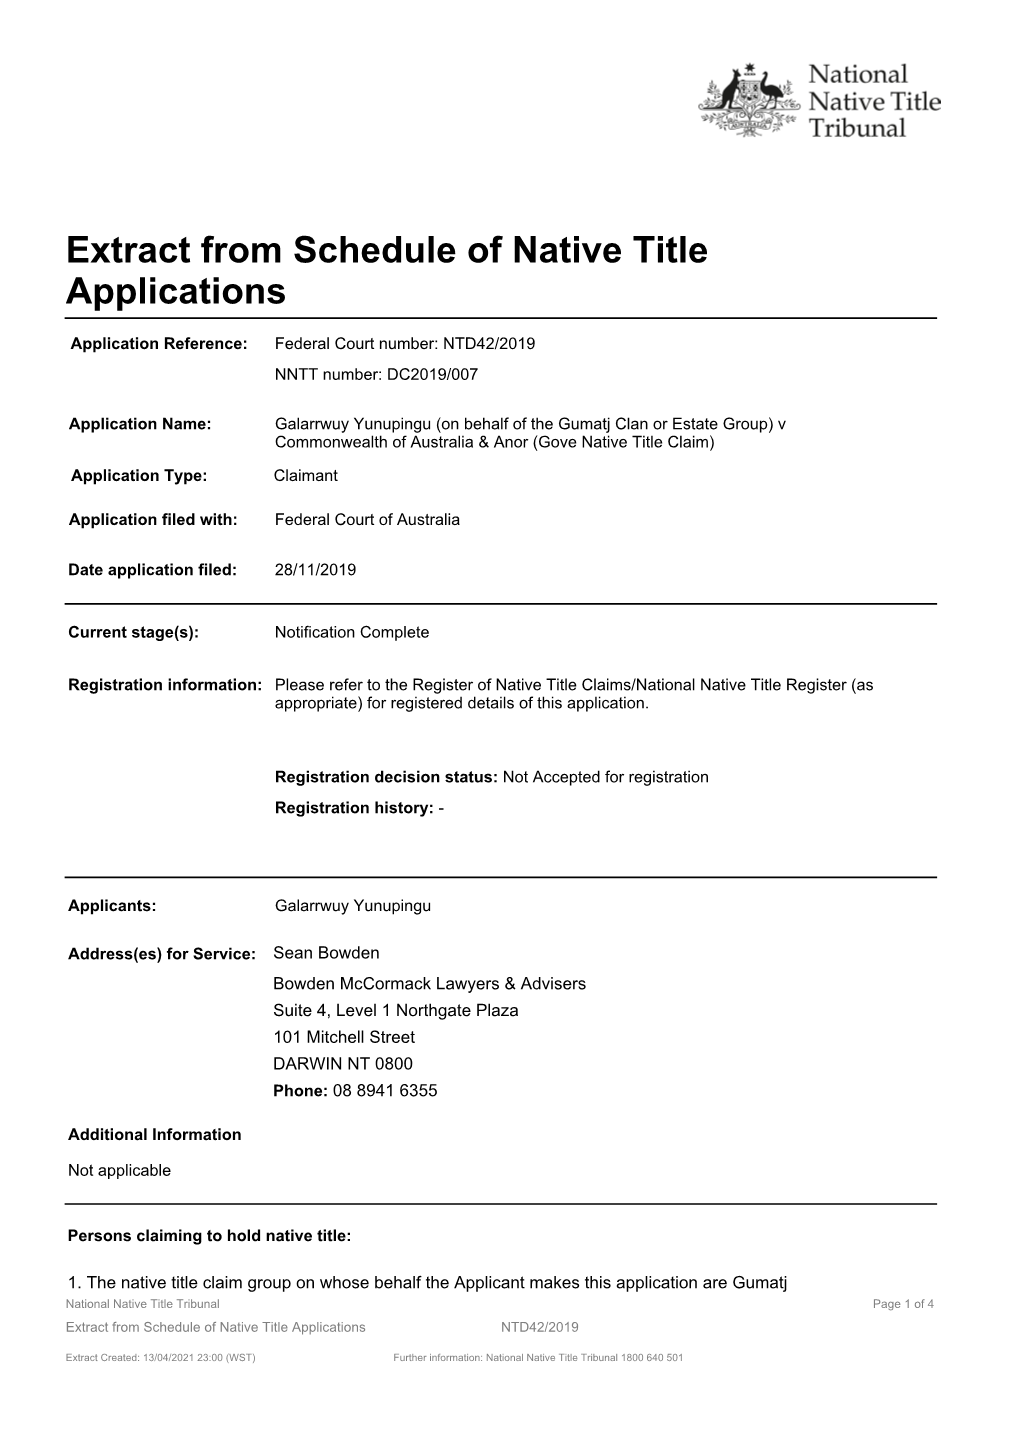 Extract from Schedule of Native Title Applications